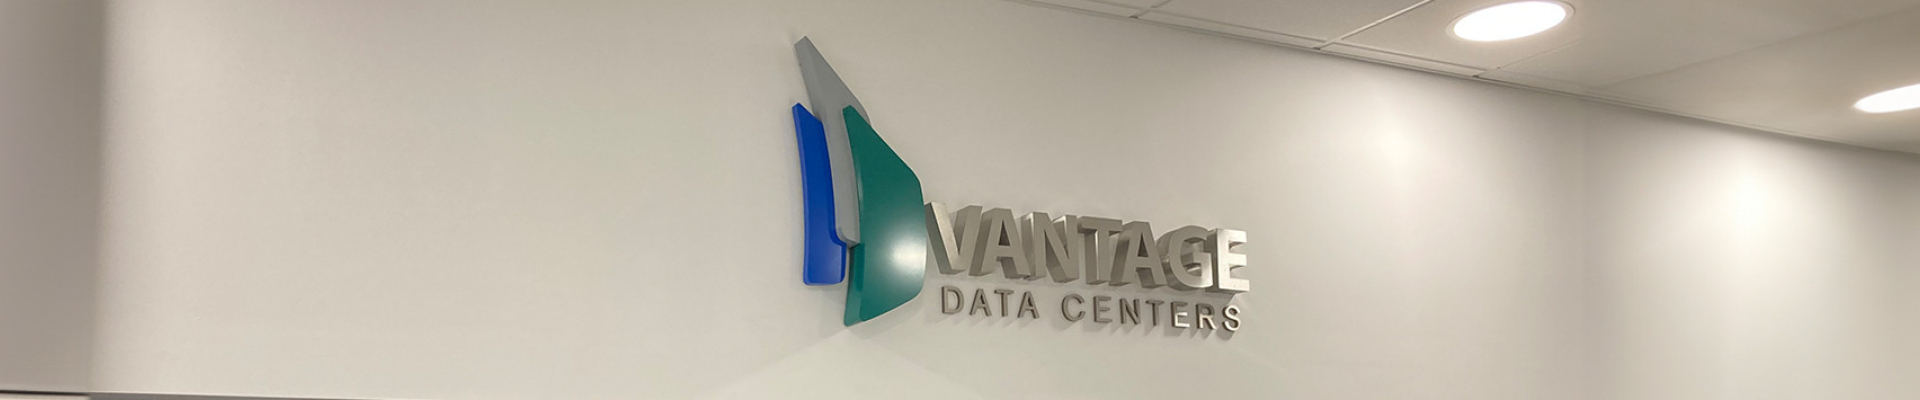 Company signs and wayfinding for Vantage delivered by Pearce Signs